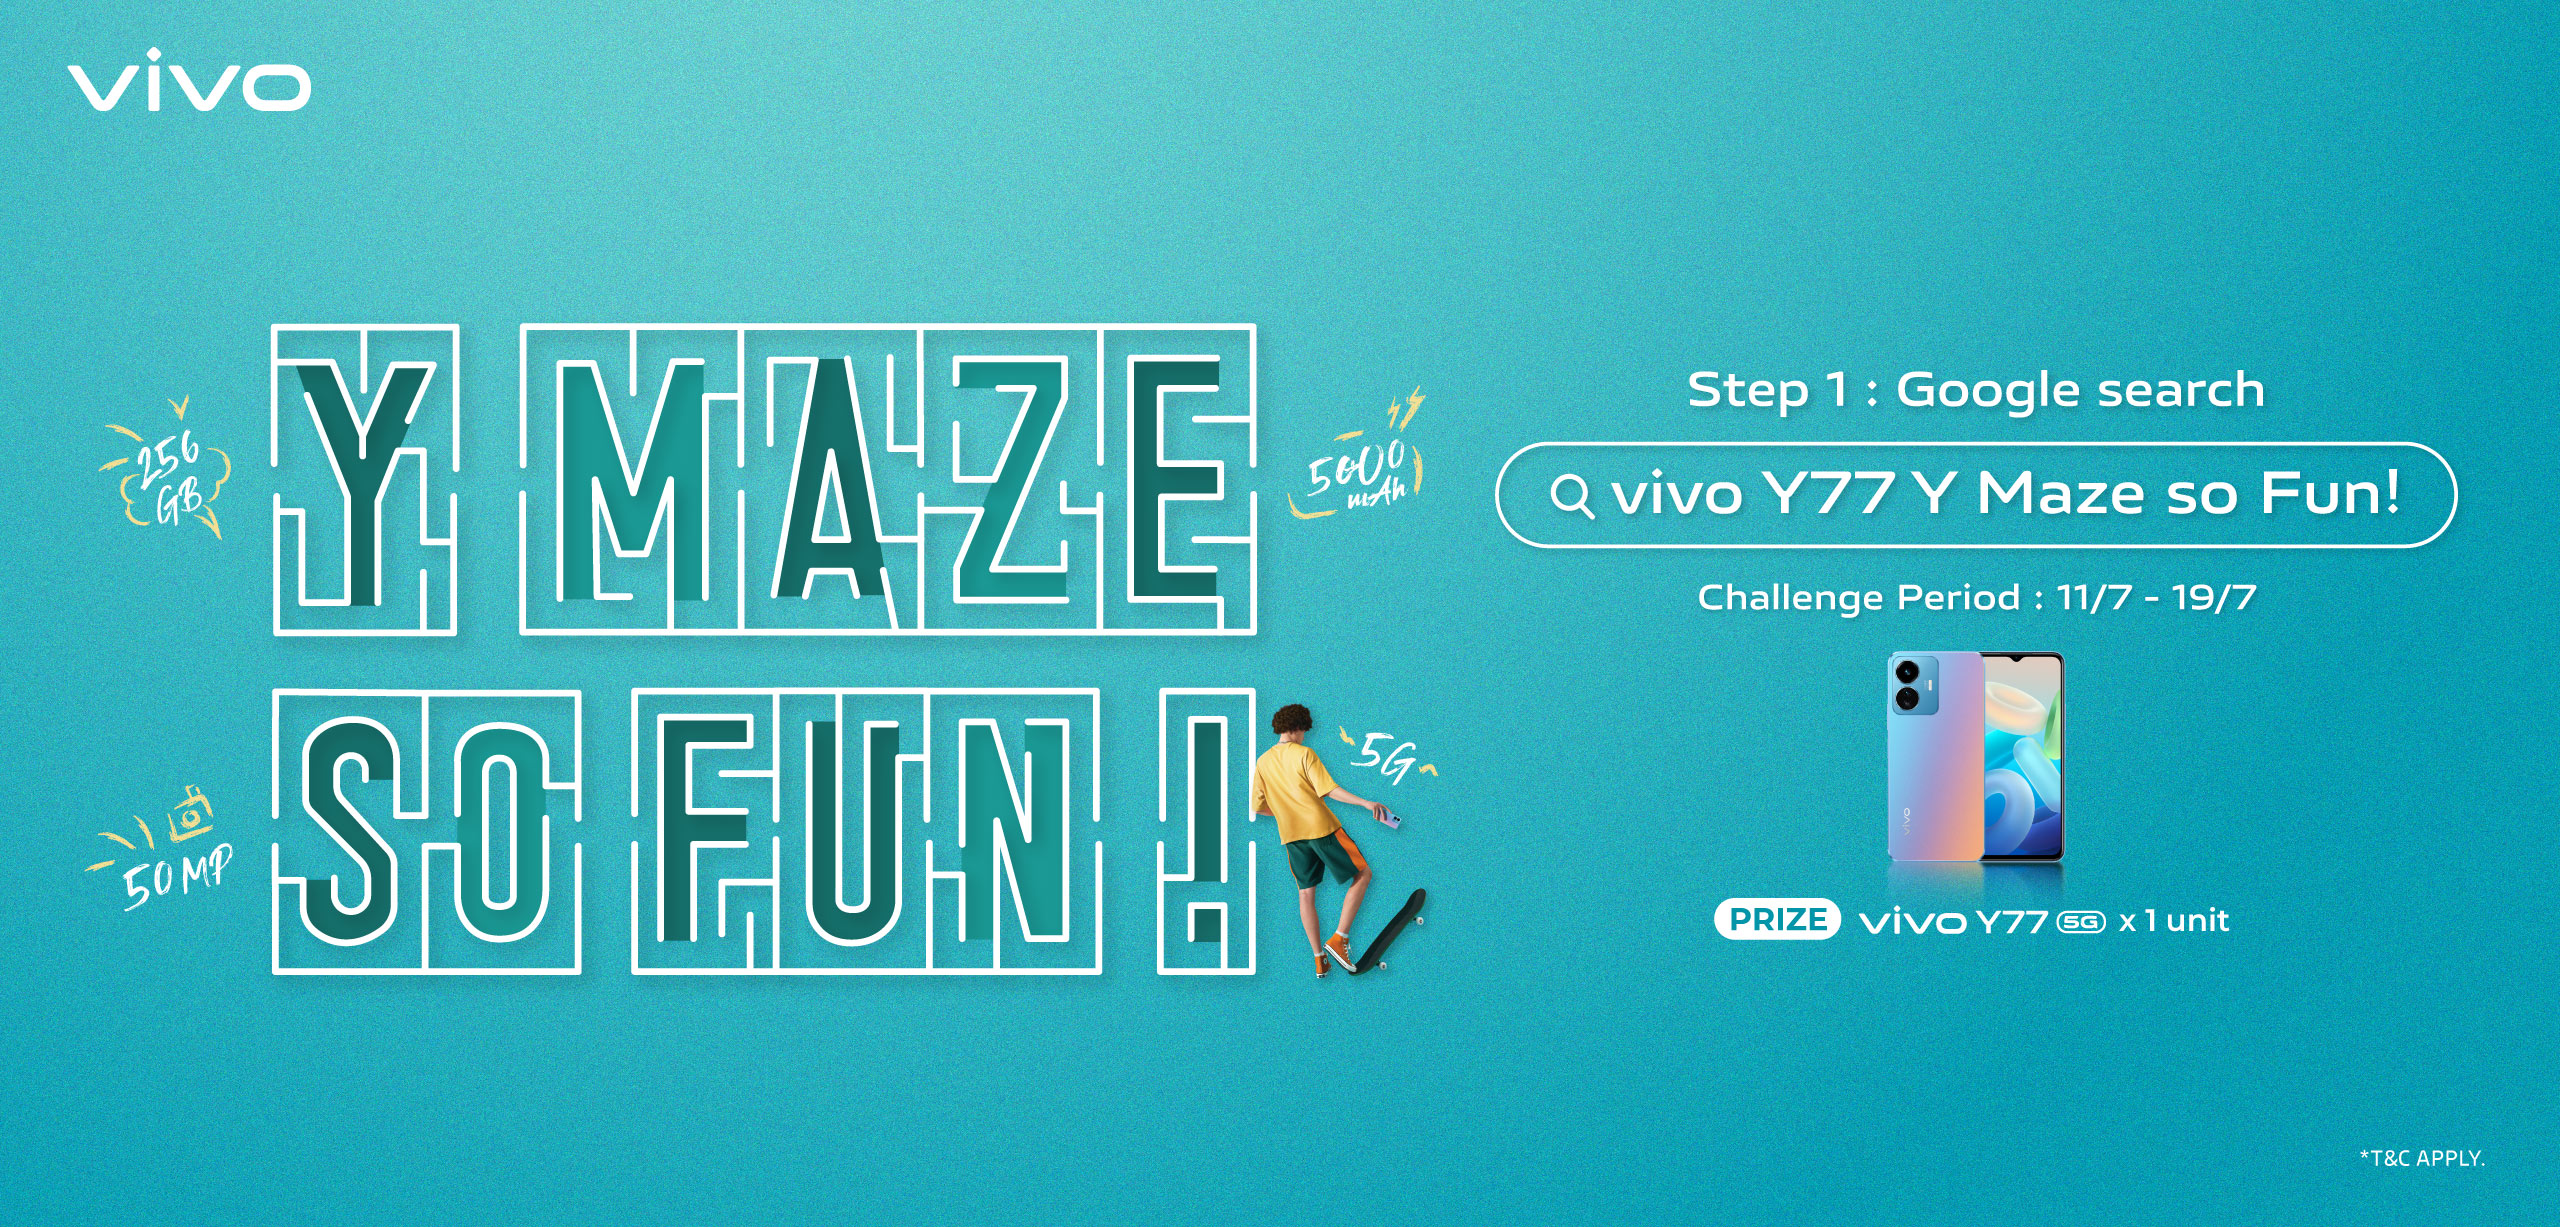 "Y maze so fun Campaign" TERMS AND CONDITIONS